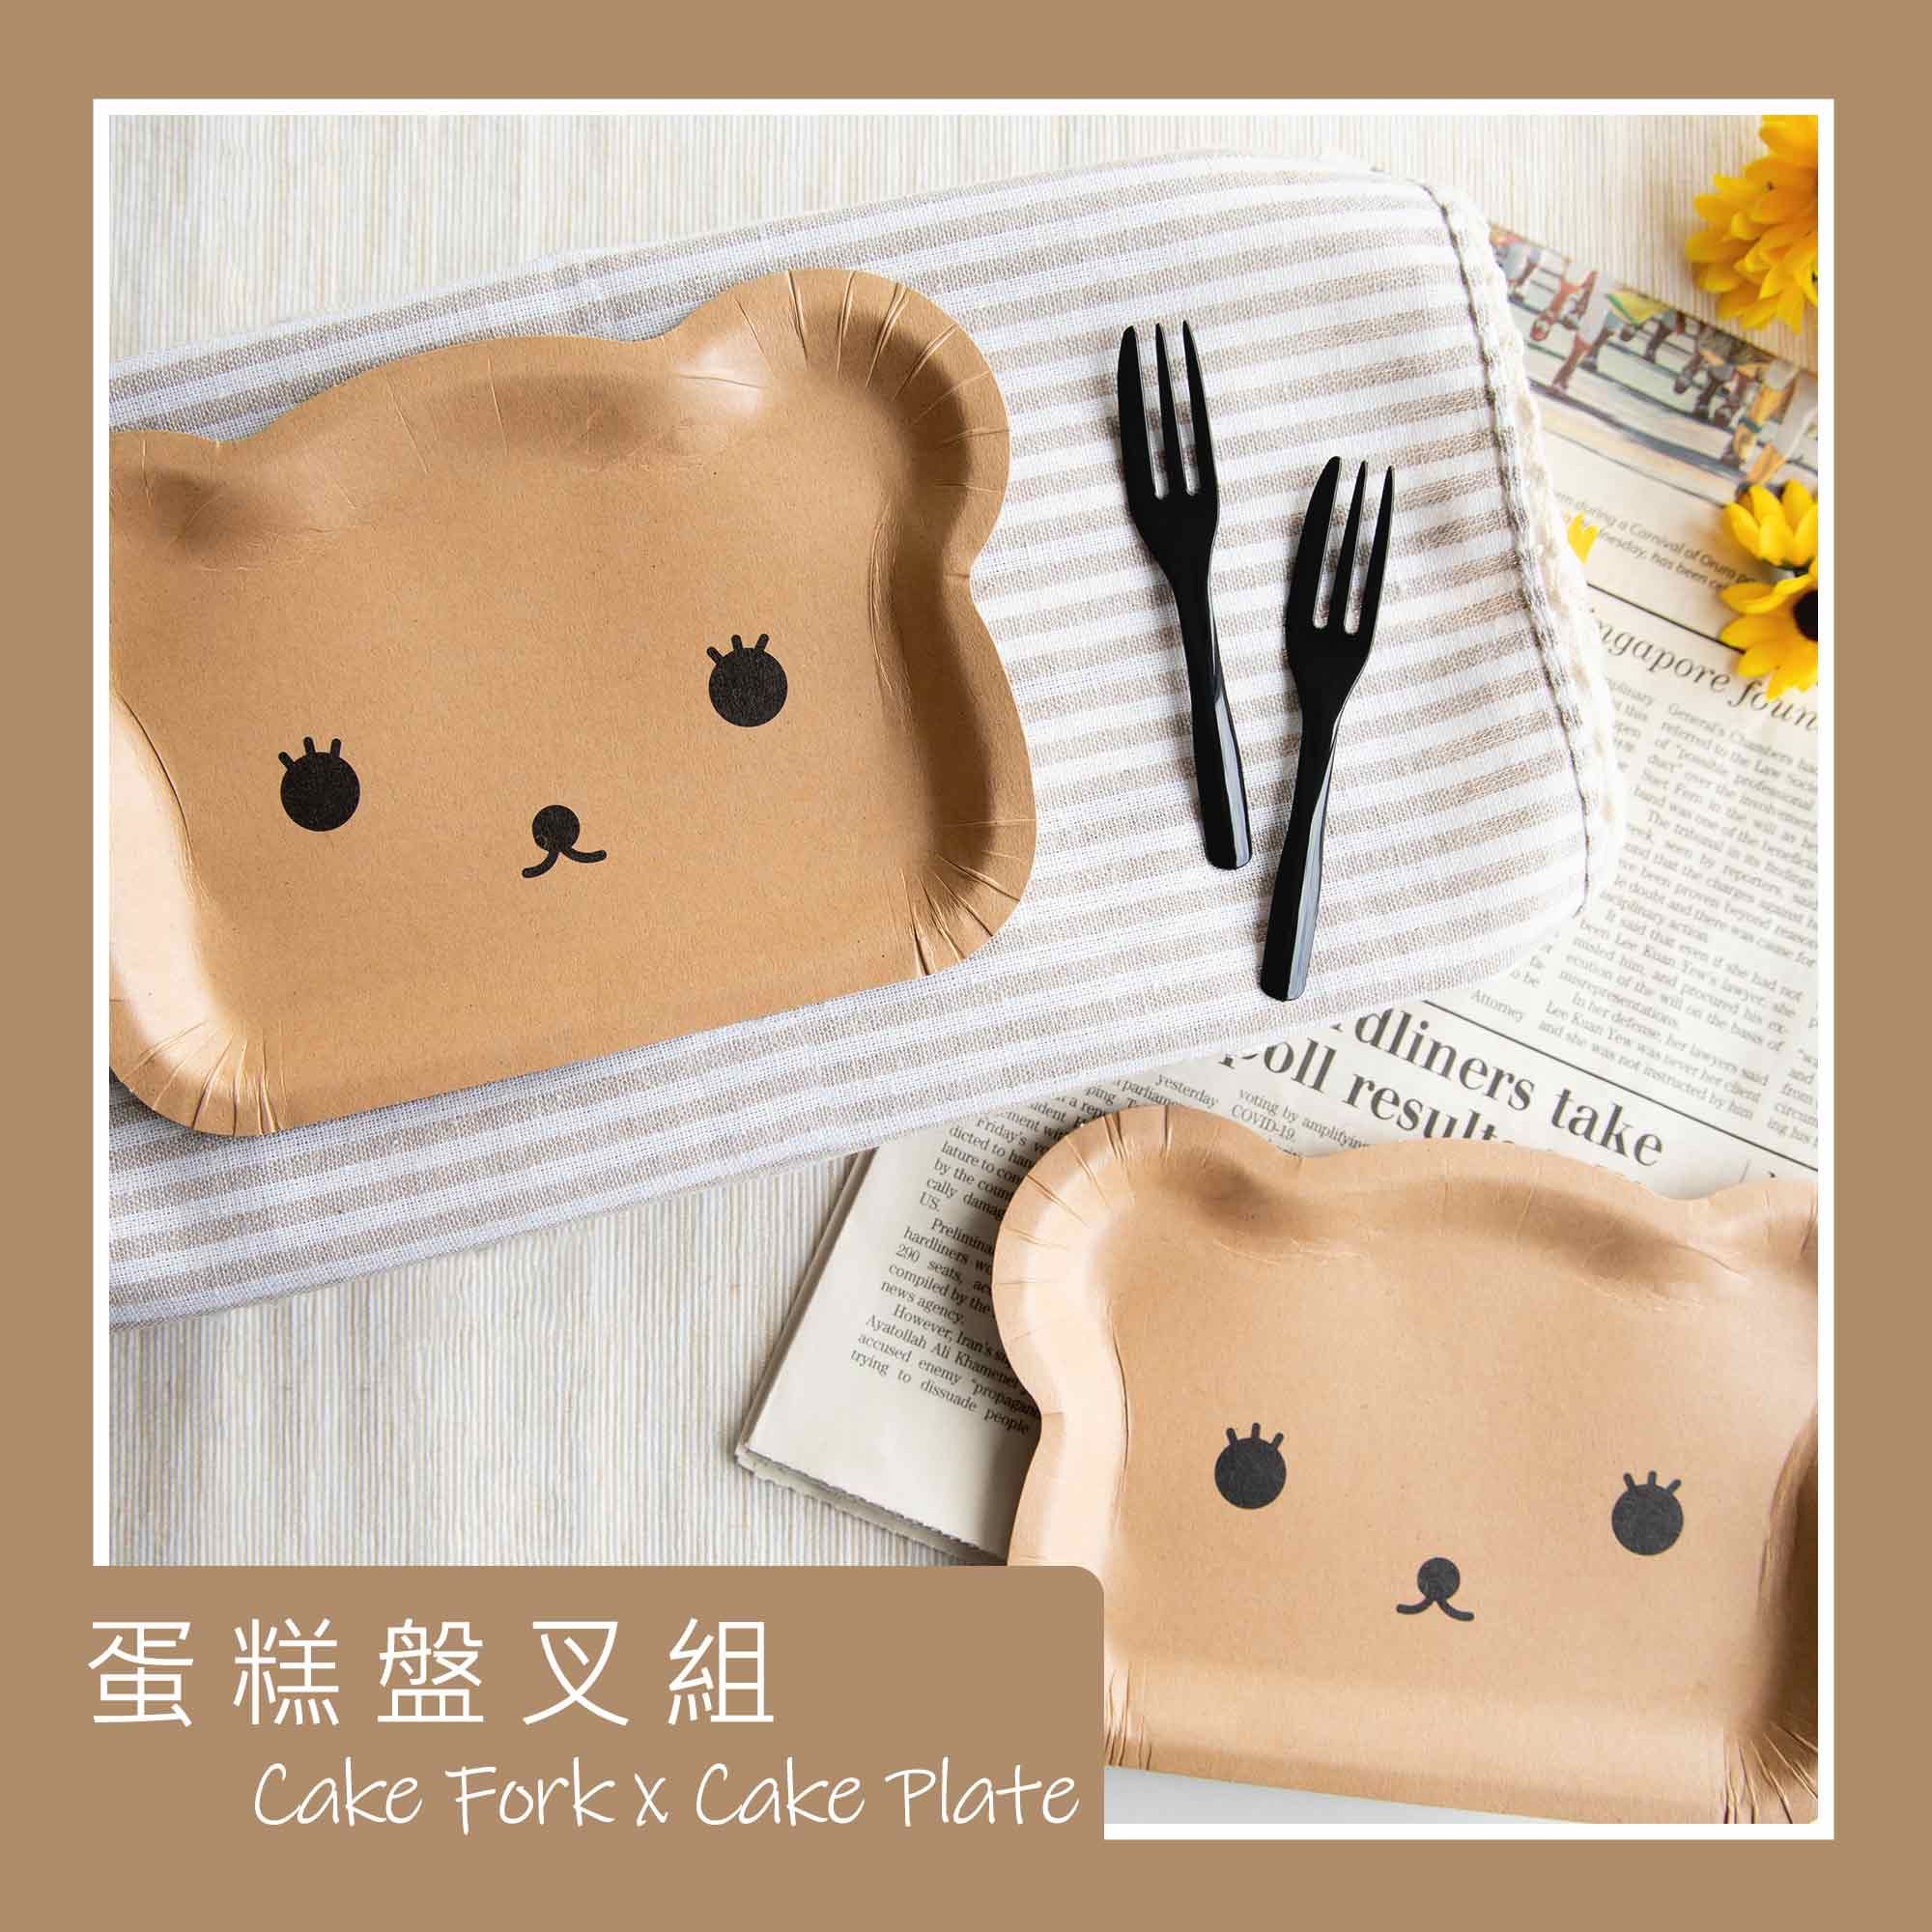 Cake Paper Plate and cake fork